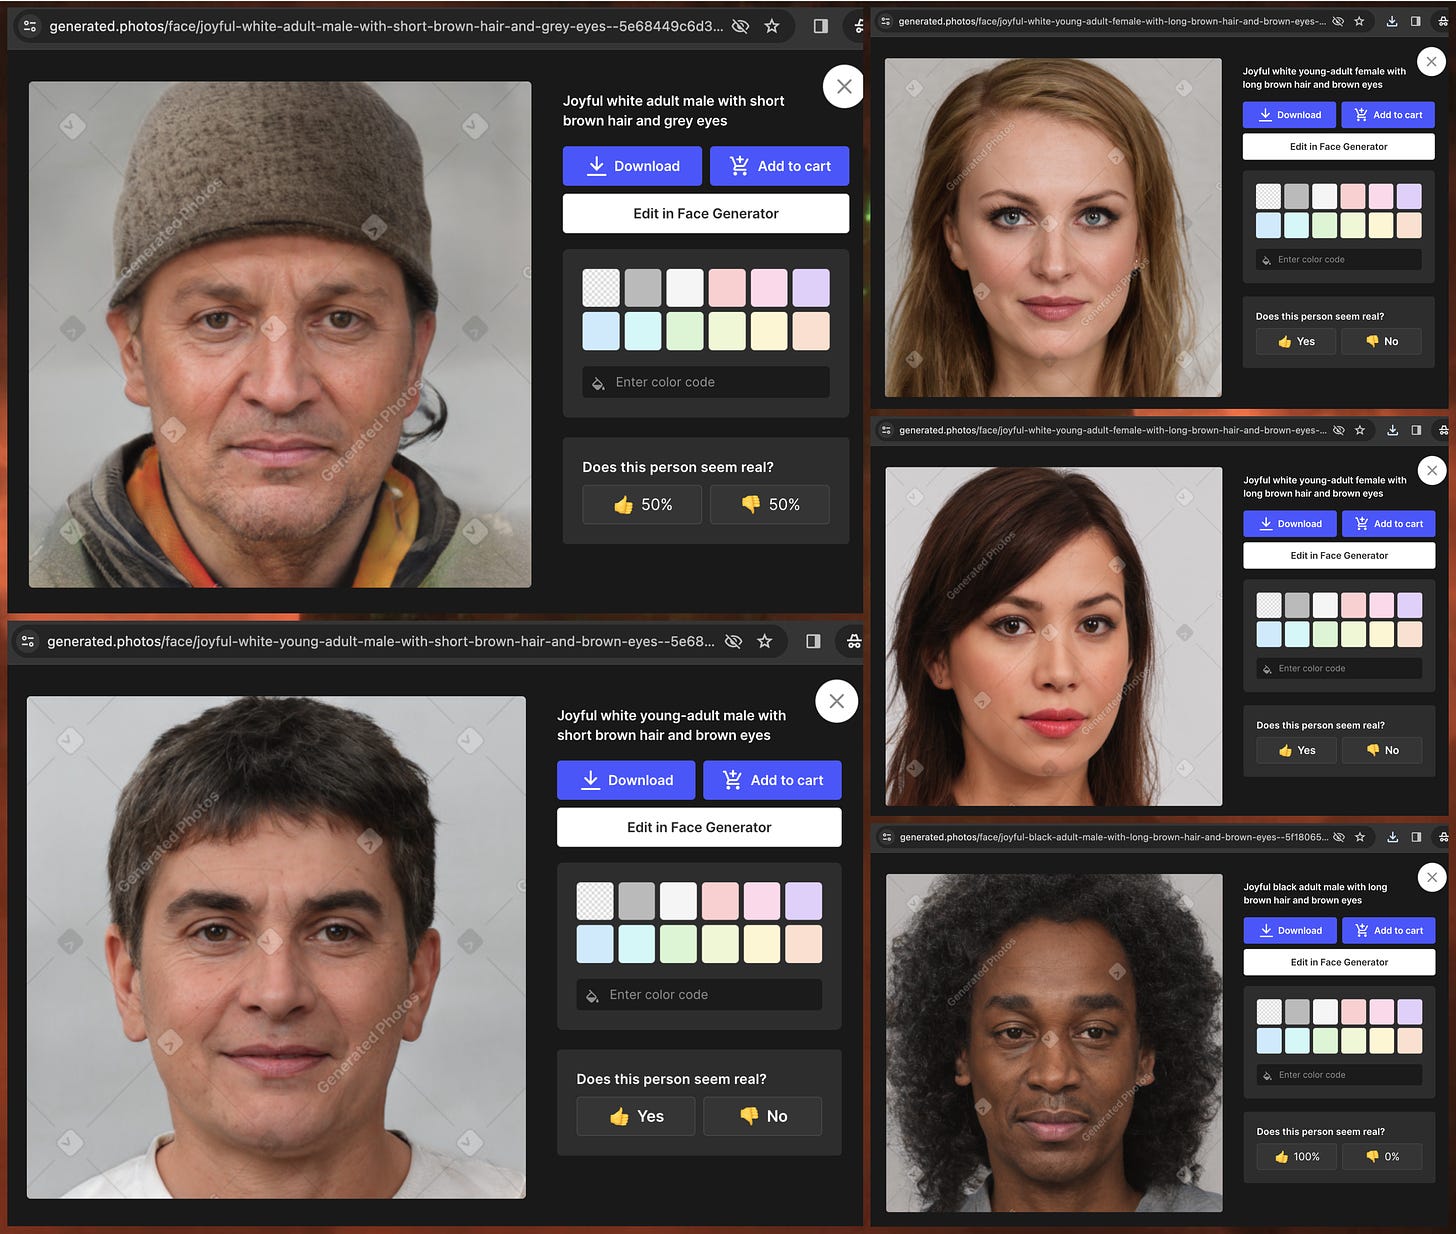 screenshot of the GAN-generated faces used by Toby P. Gelman, Rafe S. Klinger, Casey Riley, Eliza Fisher, Johnny Jock on generated.photos